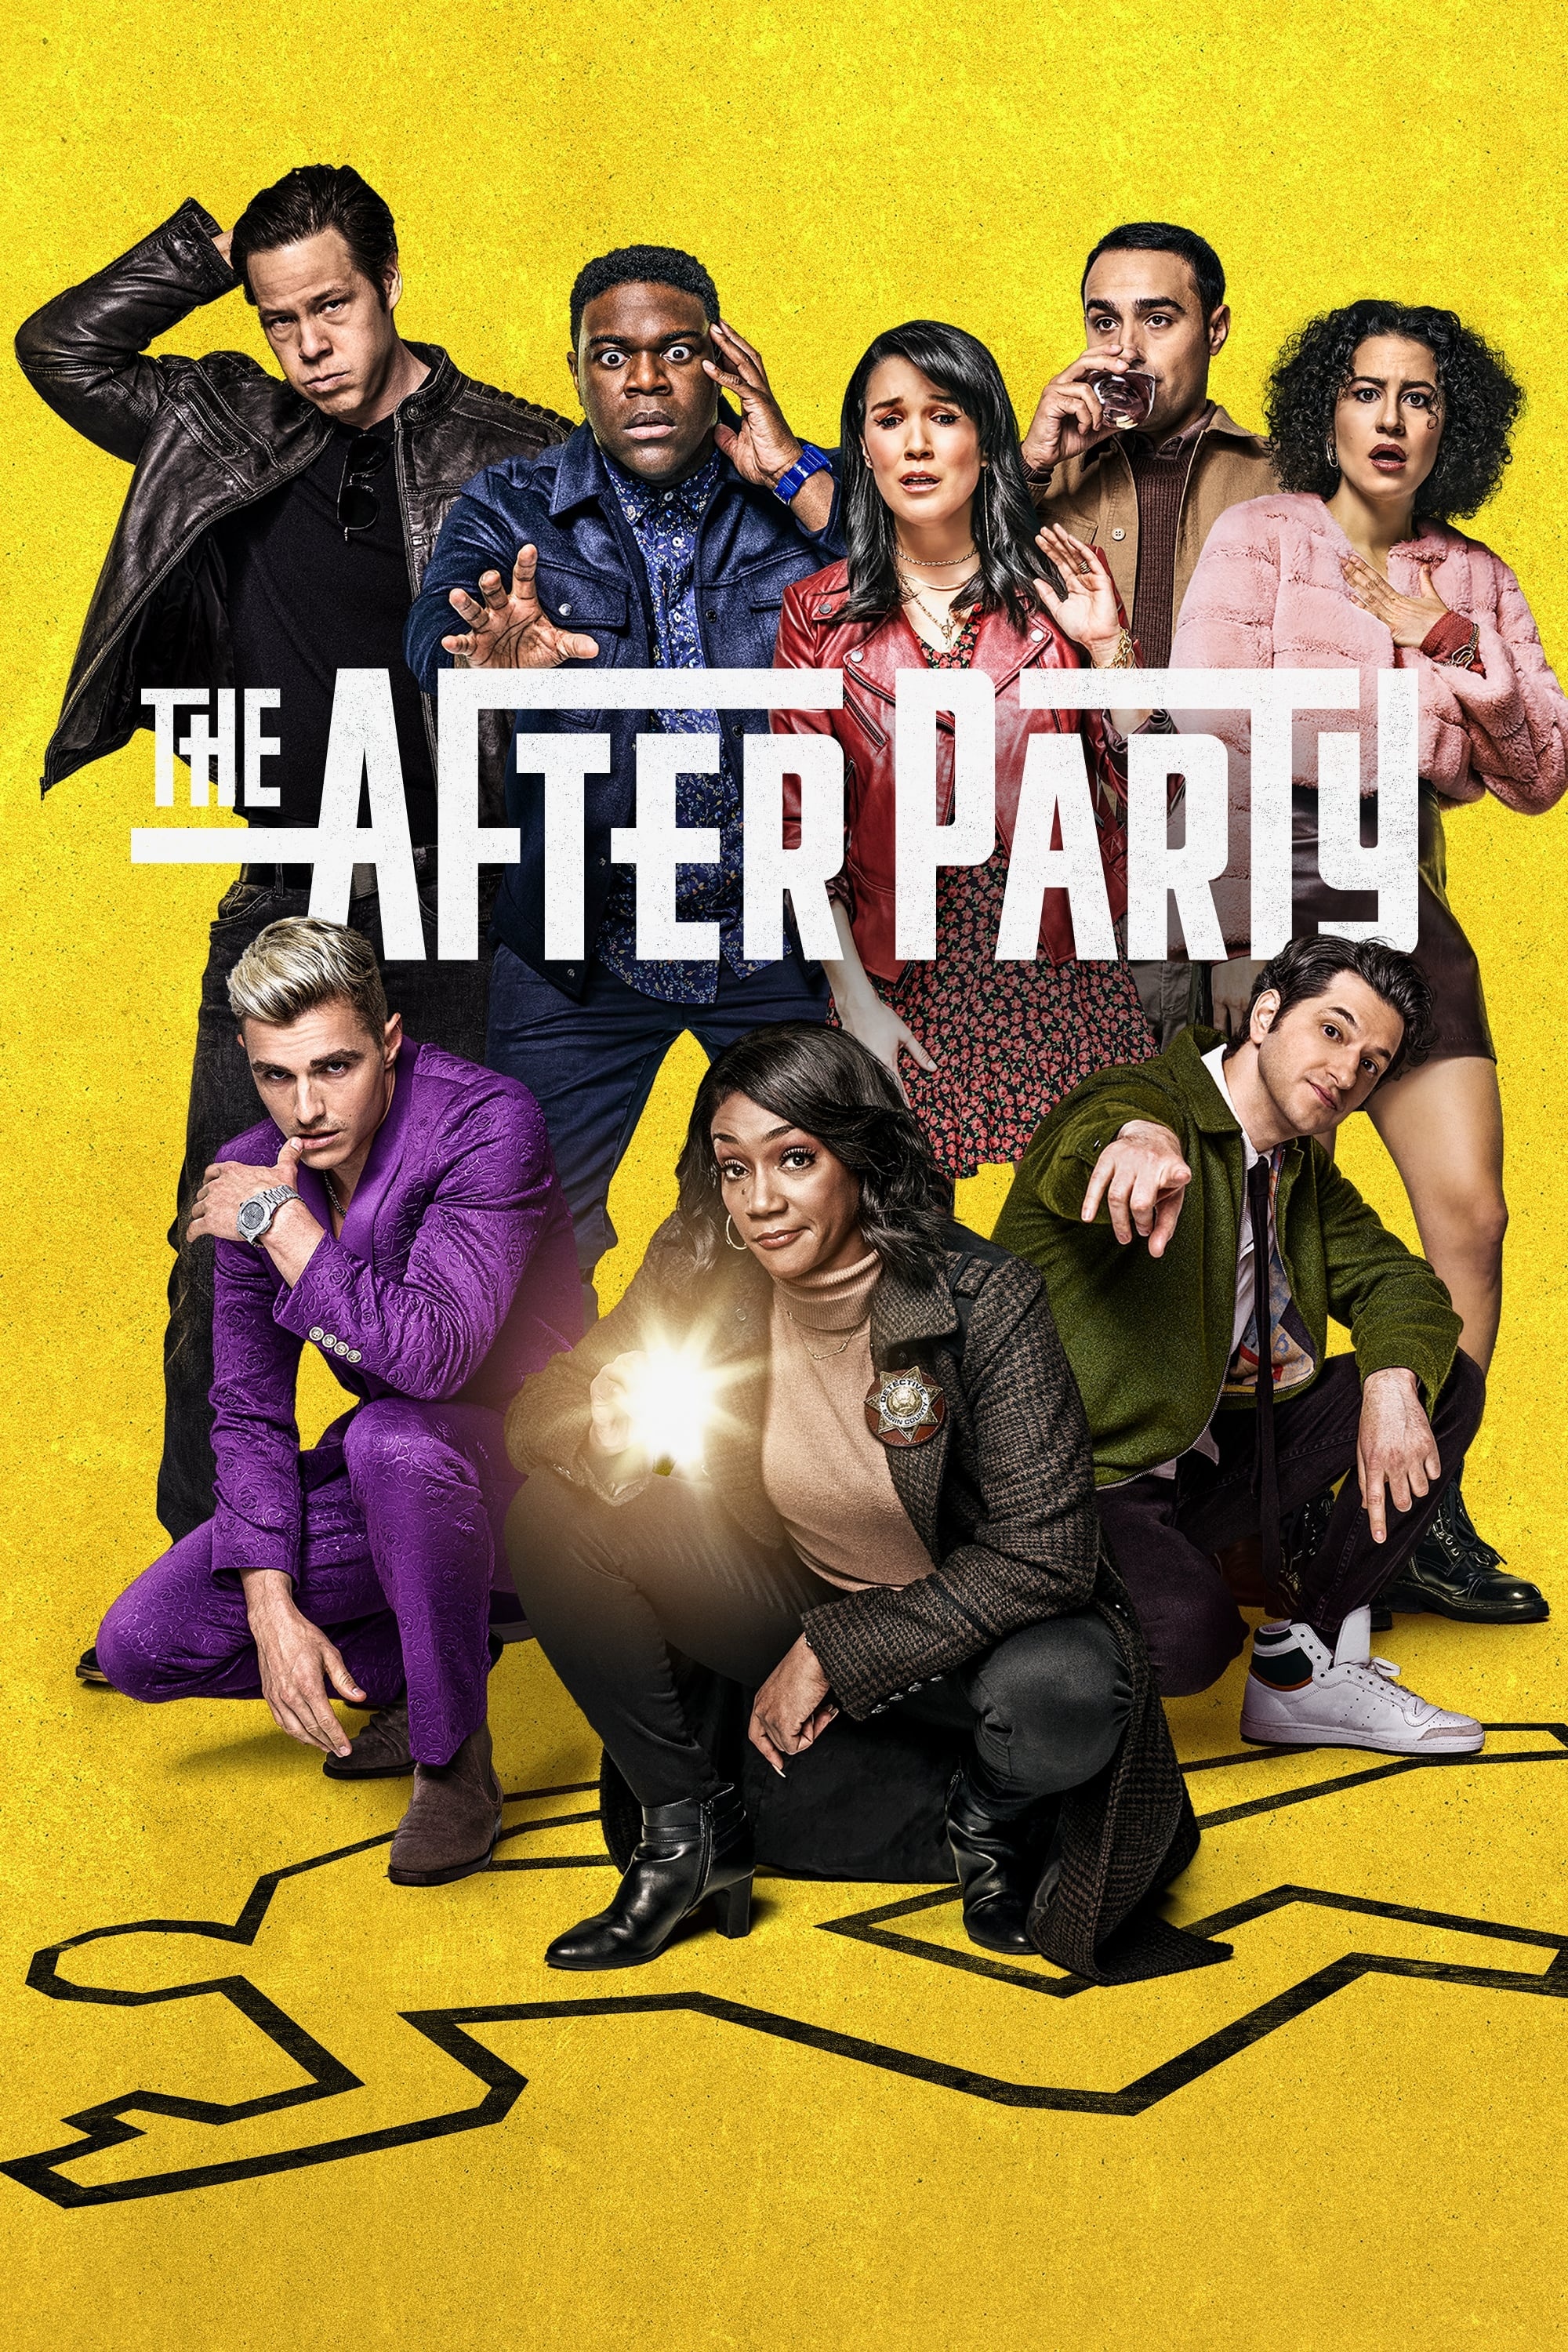 The Afterparty TV series, Comedy ensemble cast, Celebrity cameos, Hilarious party antics, 2000x3000 HD Handy